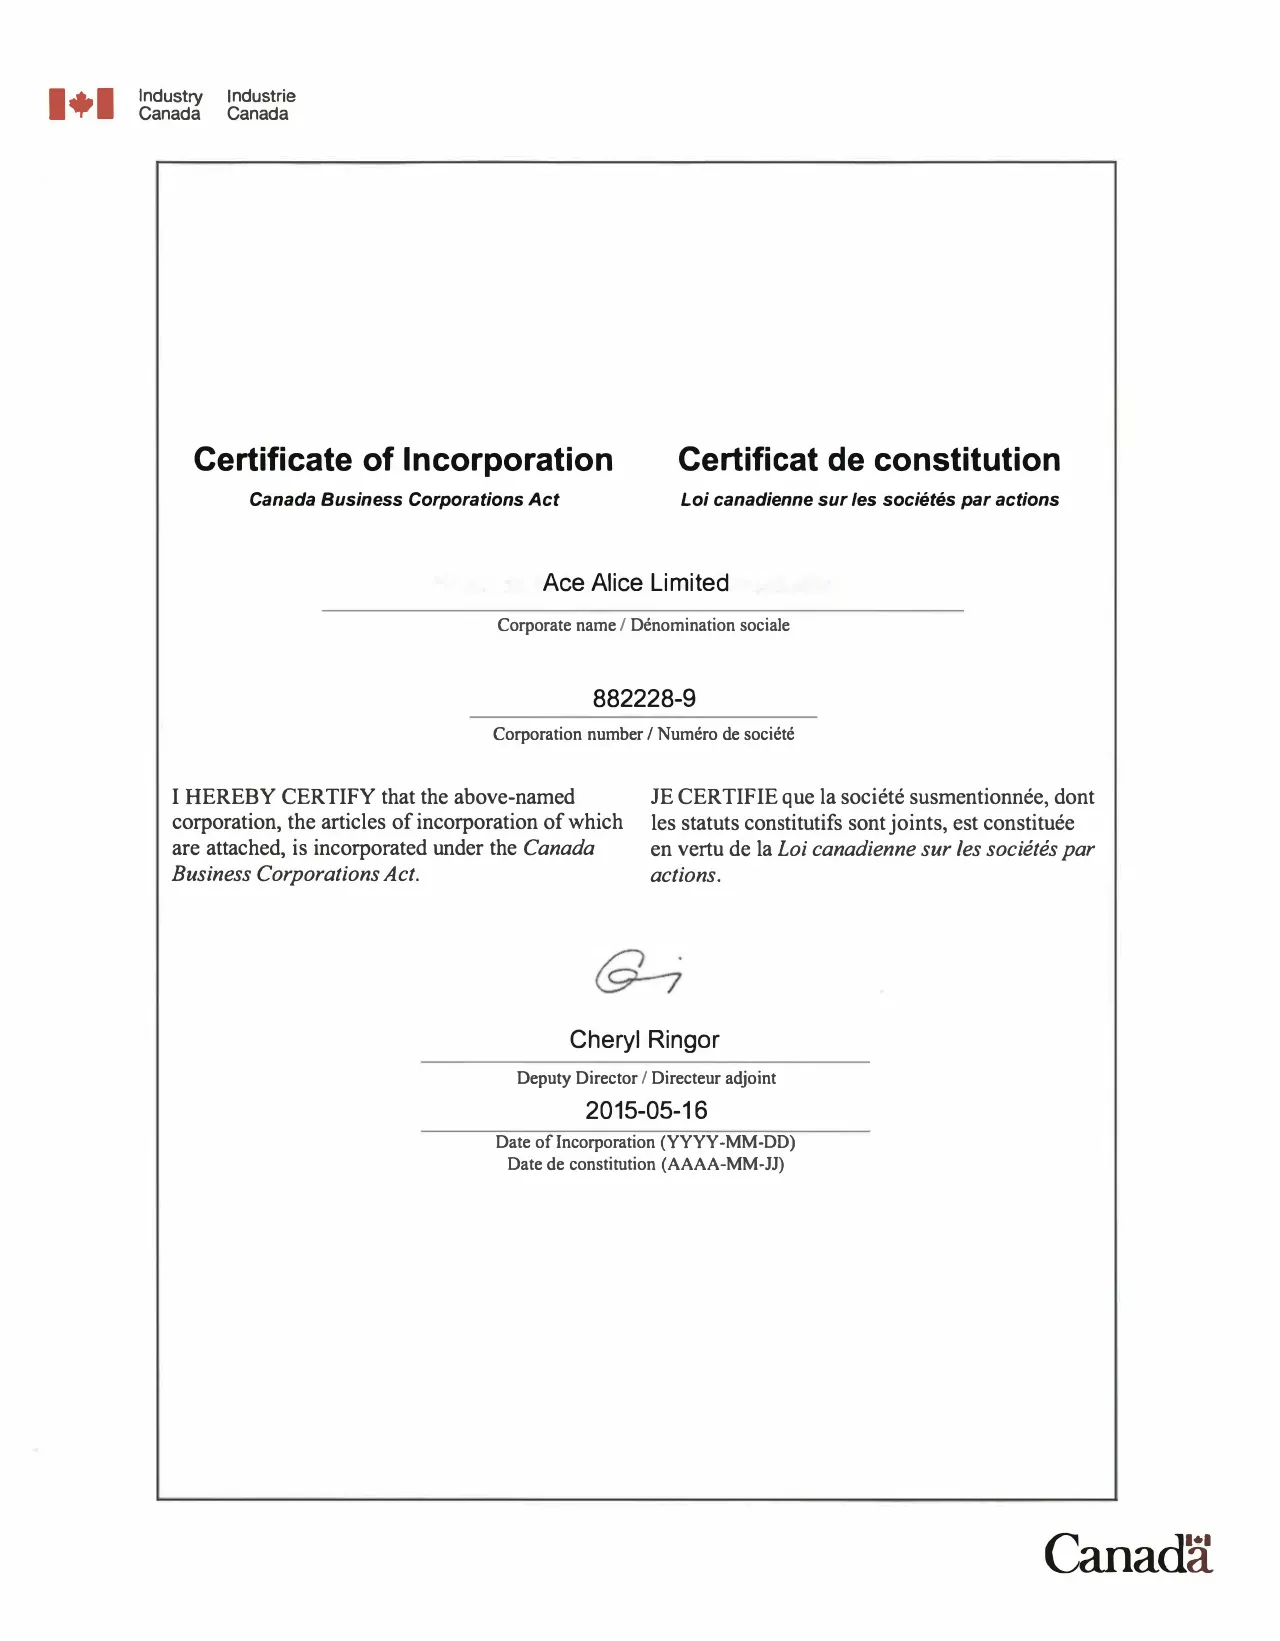 certificate of incorporation for ace alice limited